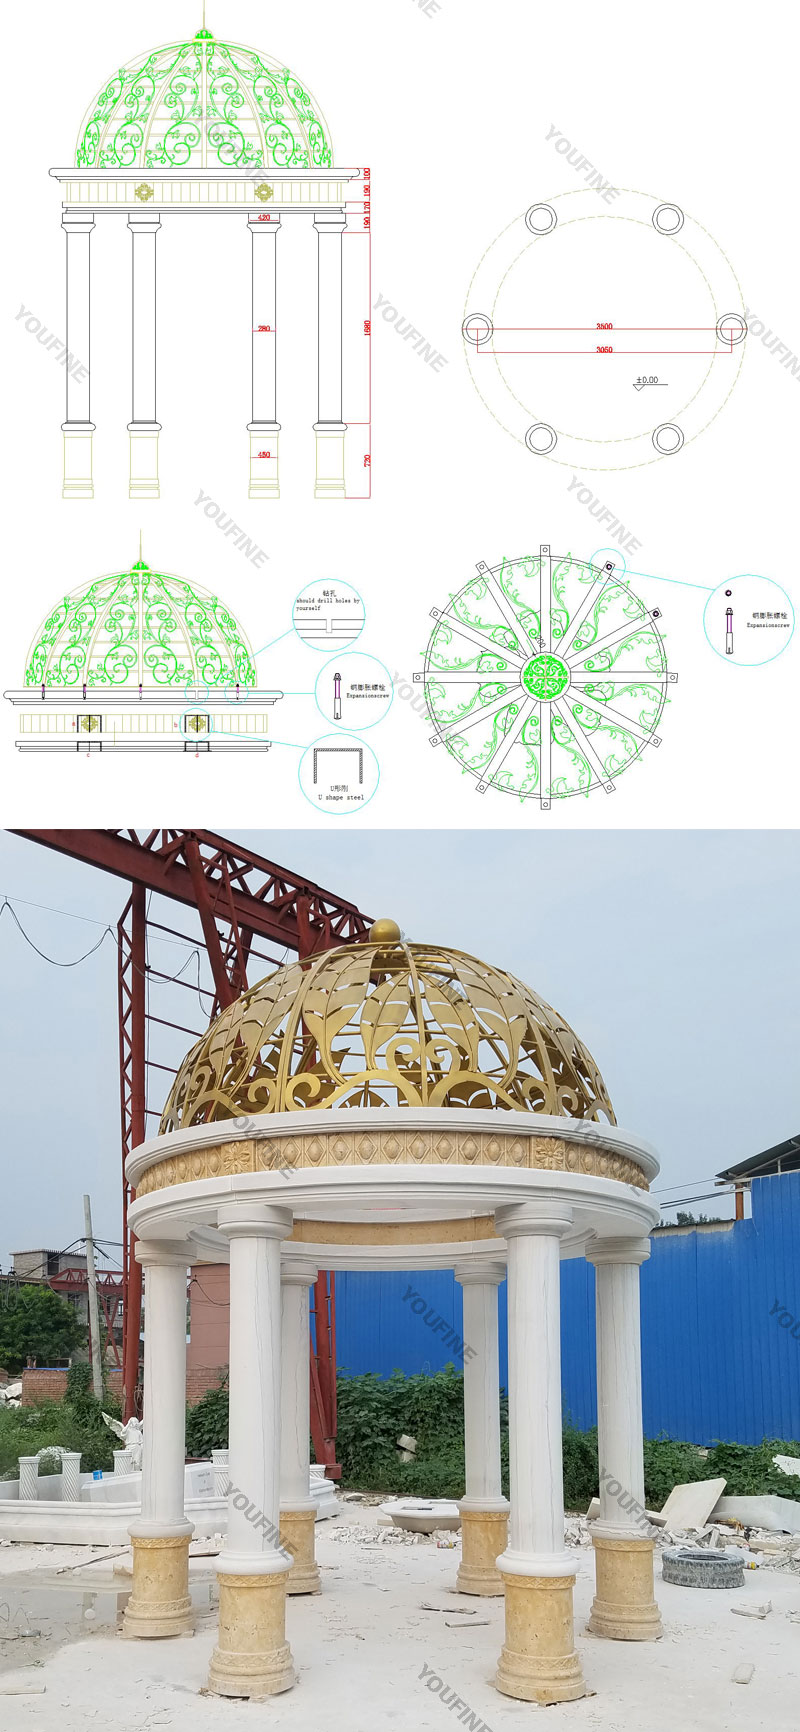 Drawing and designs of the Small marble pavilion with golden tops designs for hotel